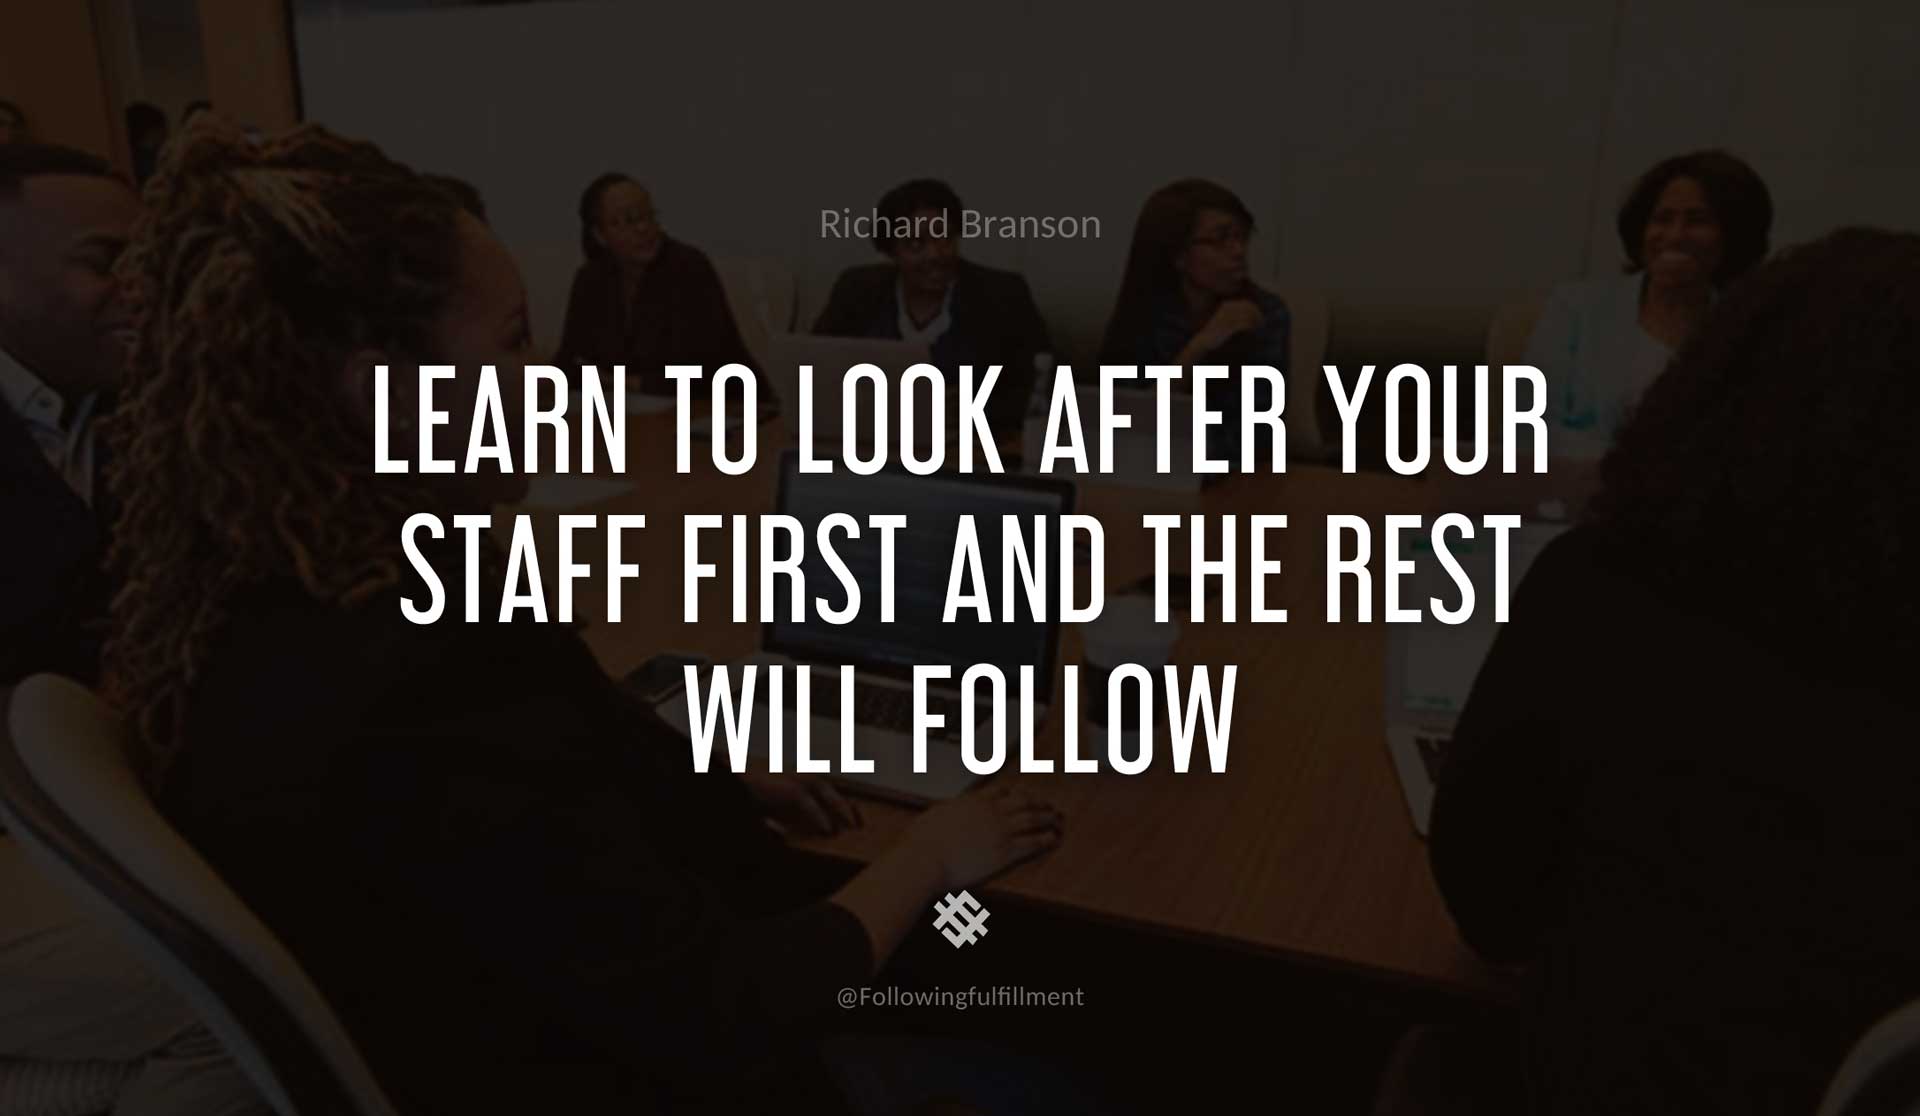 Learn-to-look-after-your-staff-first-and-the-rest-will-follow-RICHARD-BRANSON-Quote.jpg